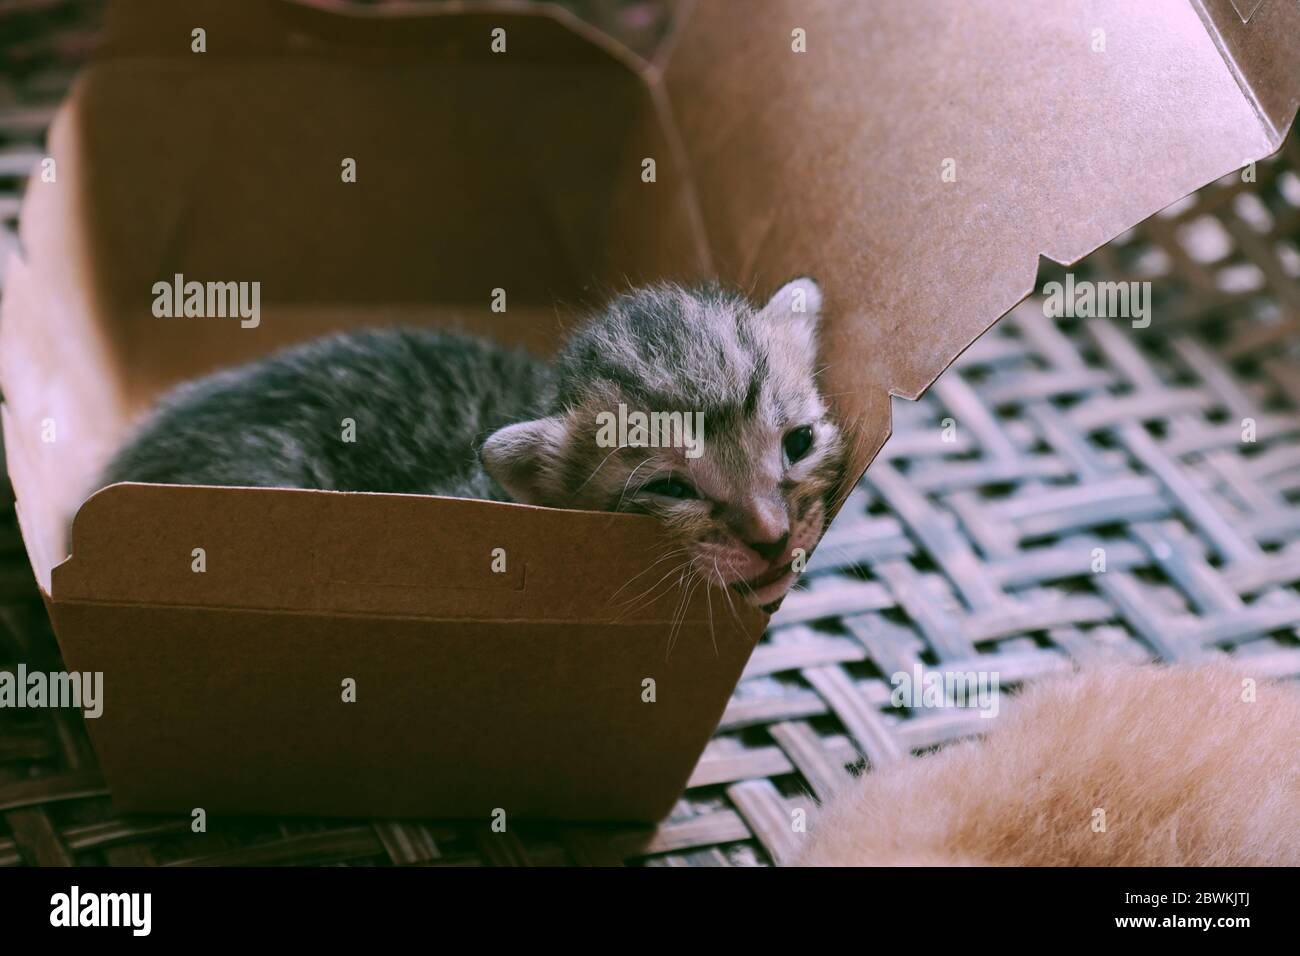 Cute newborn kitten lay down in paper gift box, close up baby cat with grey feather looking so pretty Stock Photo